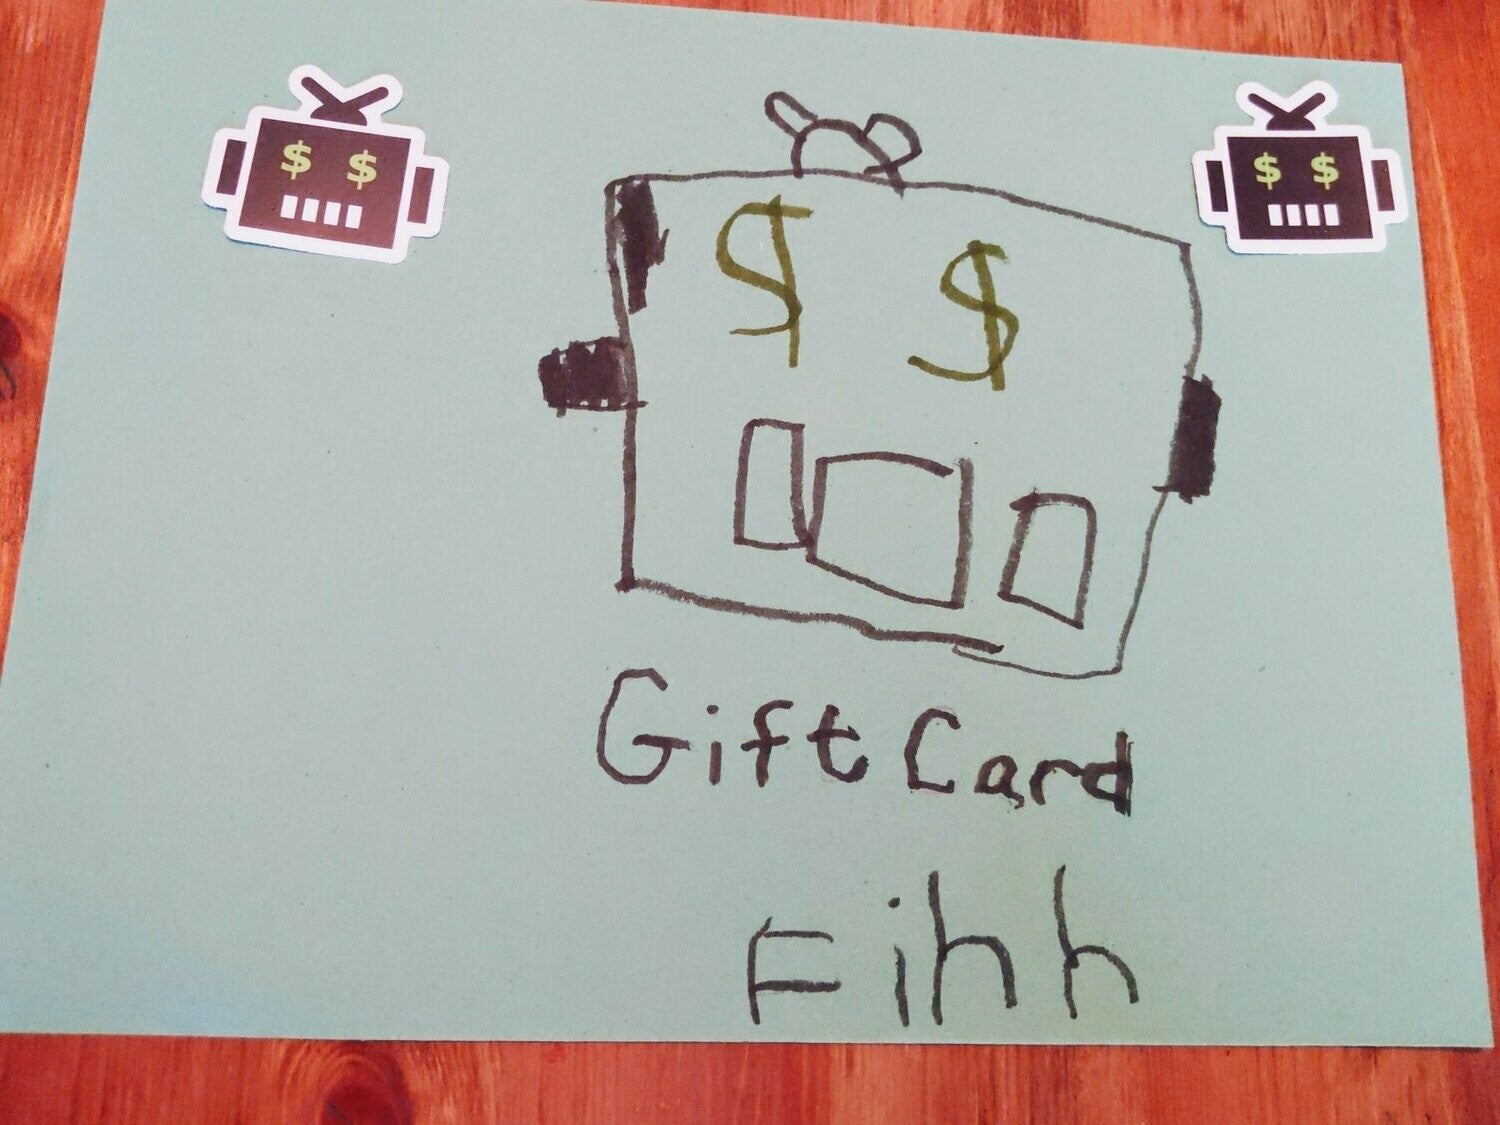 The Thrifty Bot Gift Card